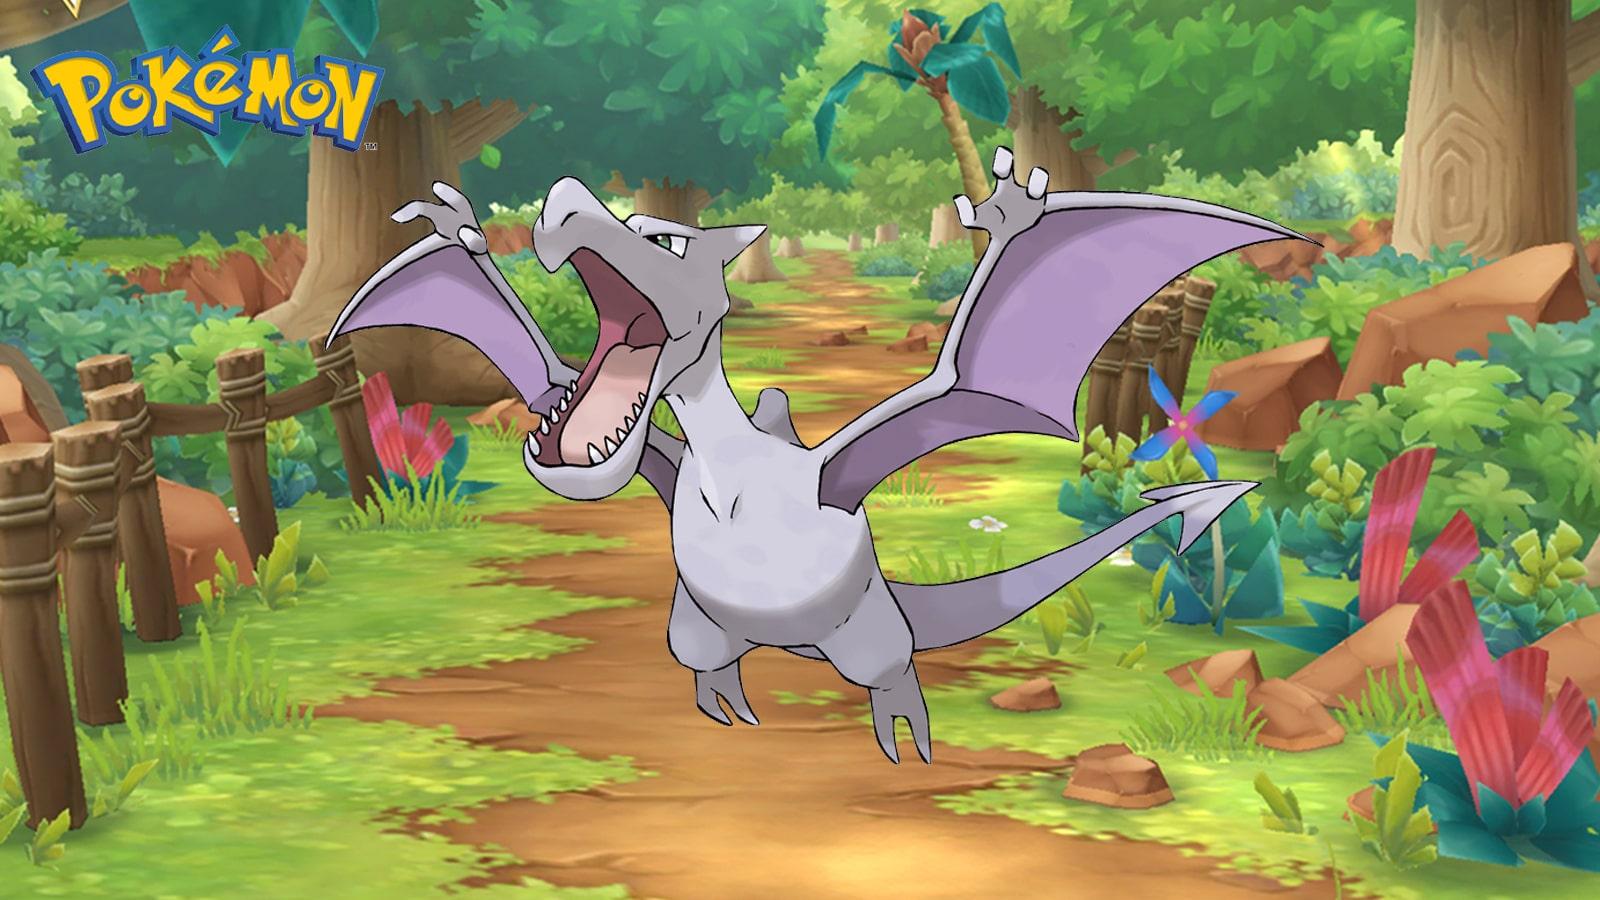 Aerodactyl type, strengths, weaknesses, evolutions, moves, and